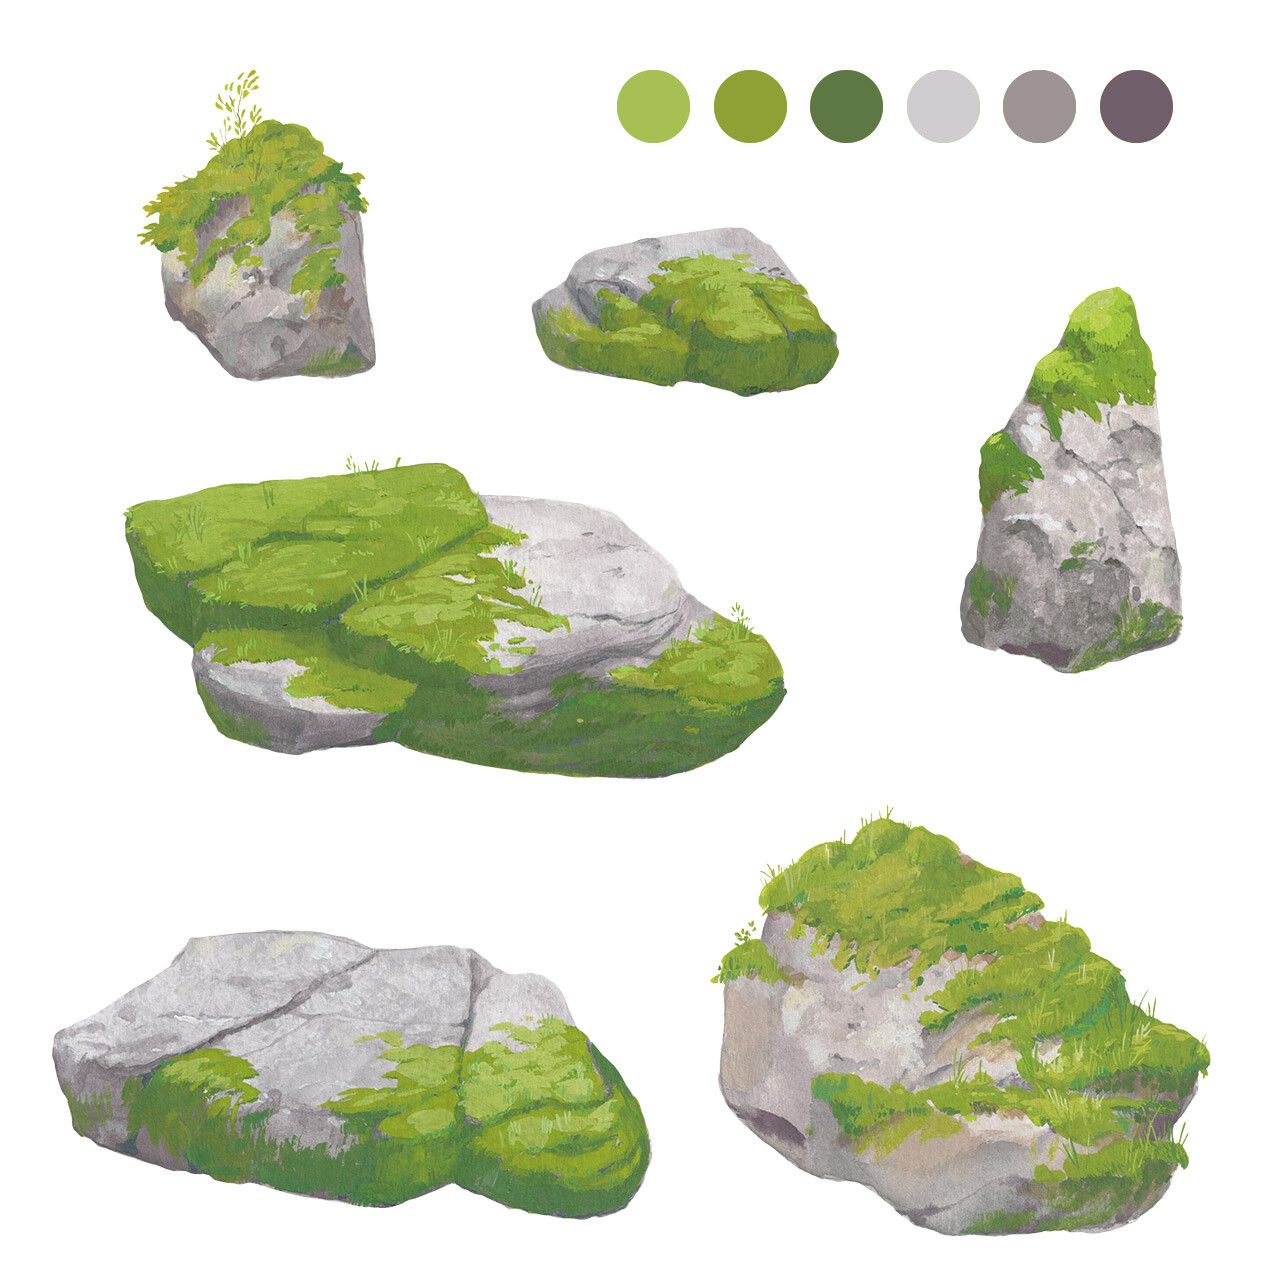 Johanna Capelle - Bare Rocks and Moss Props for PIXELREF